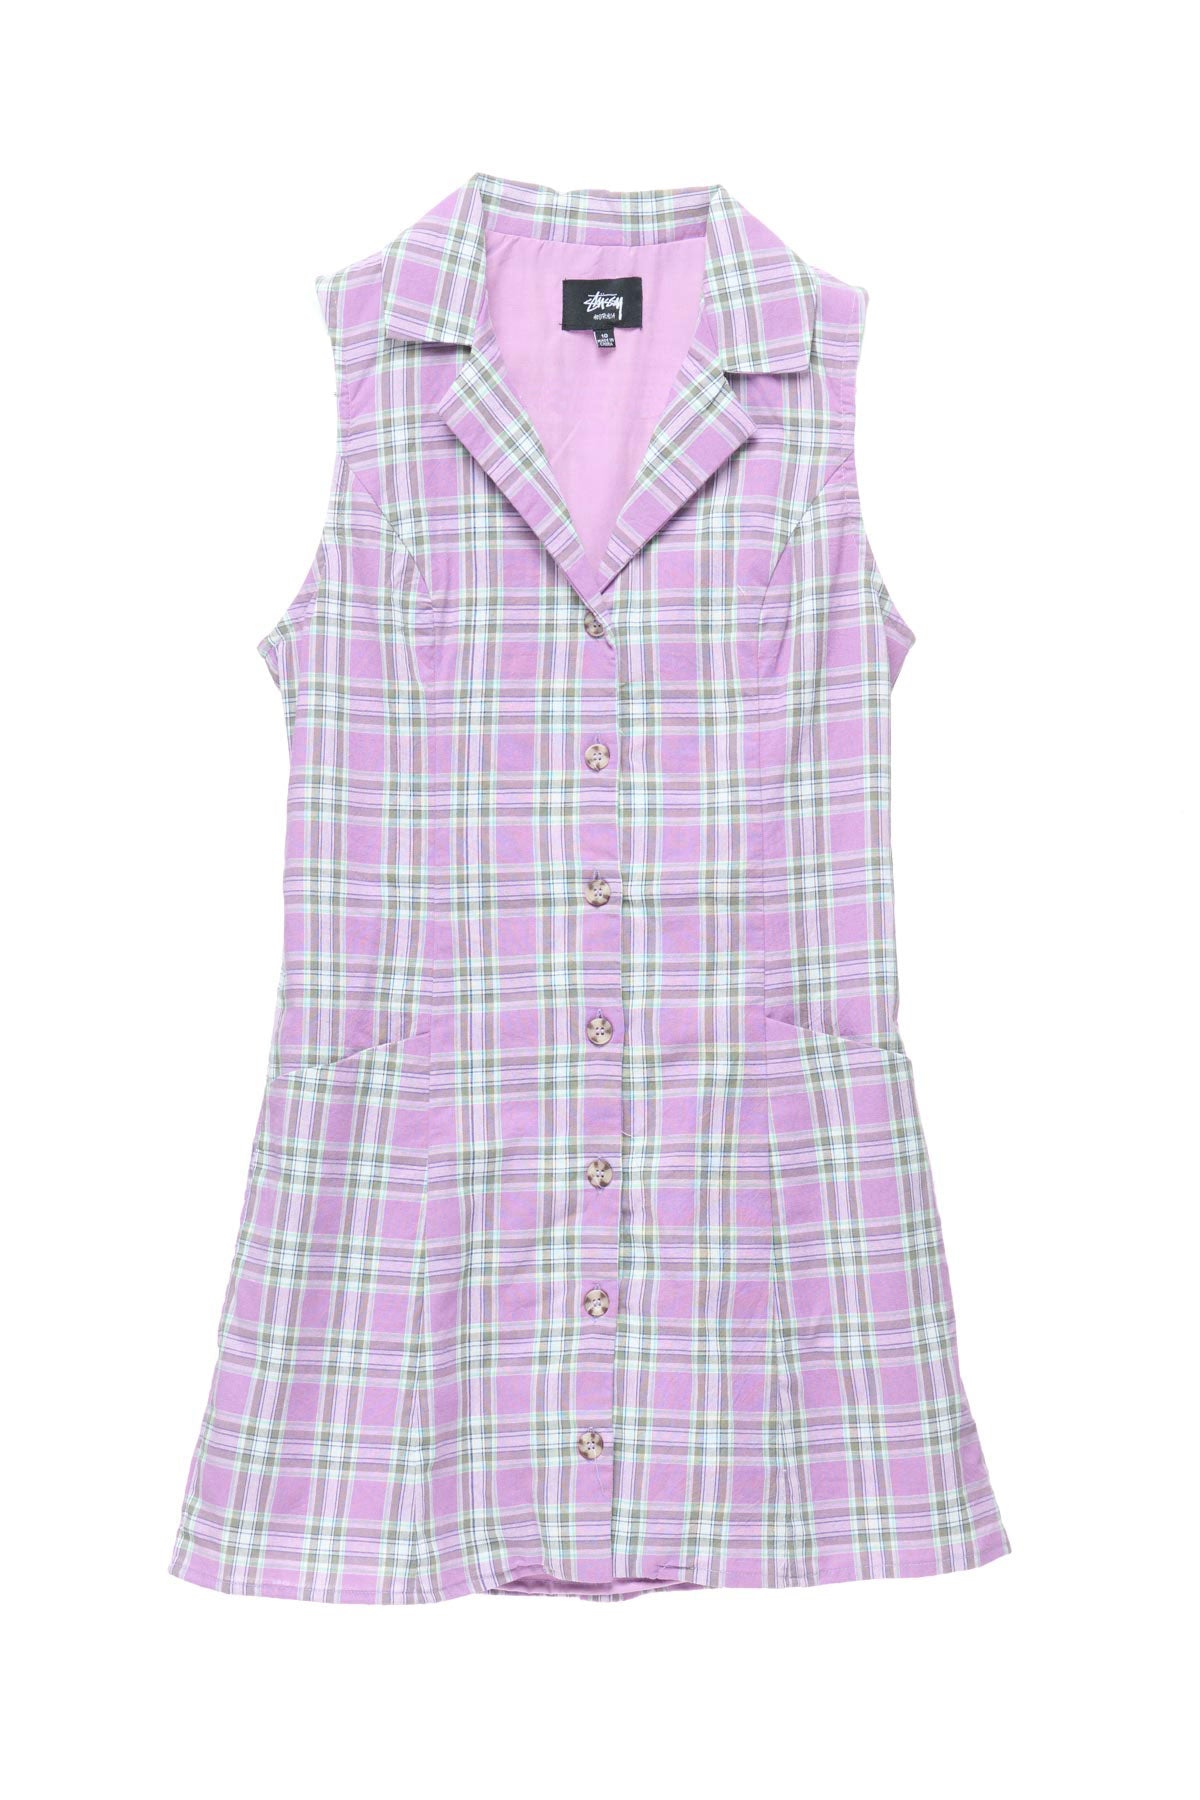 CHECK TIE BACK DRESS - Orchid